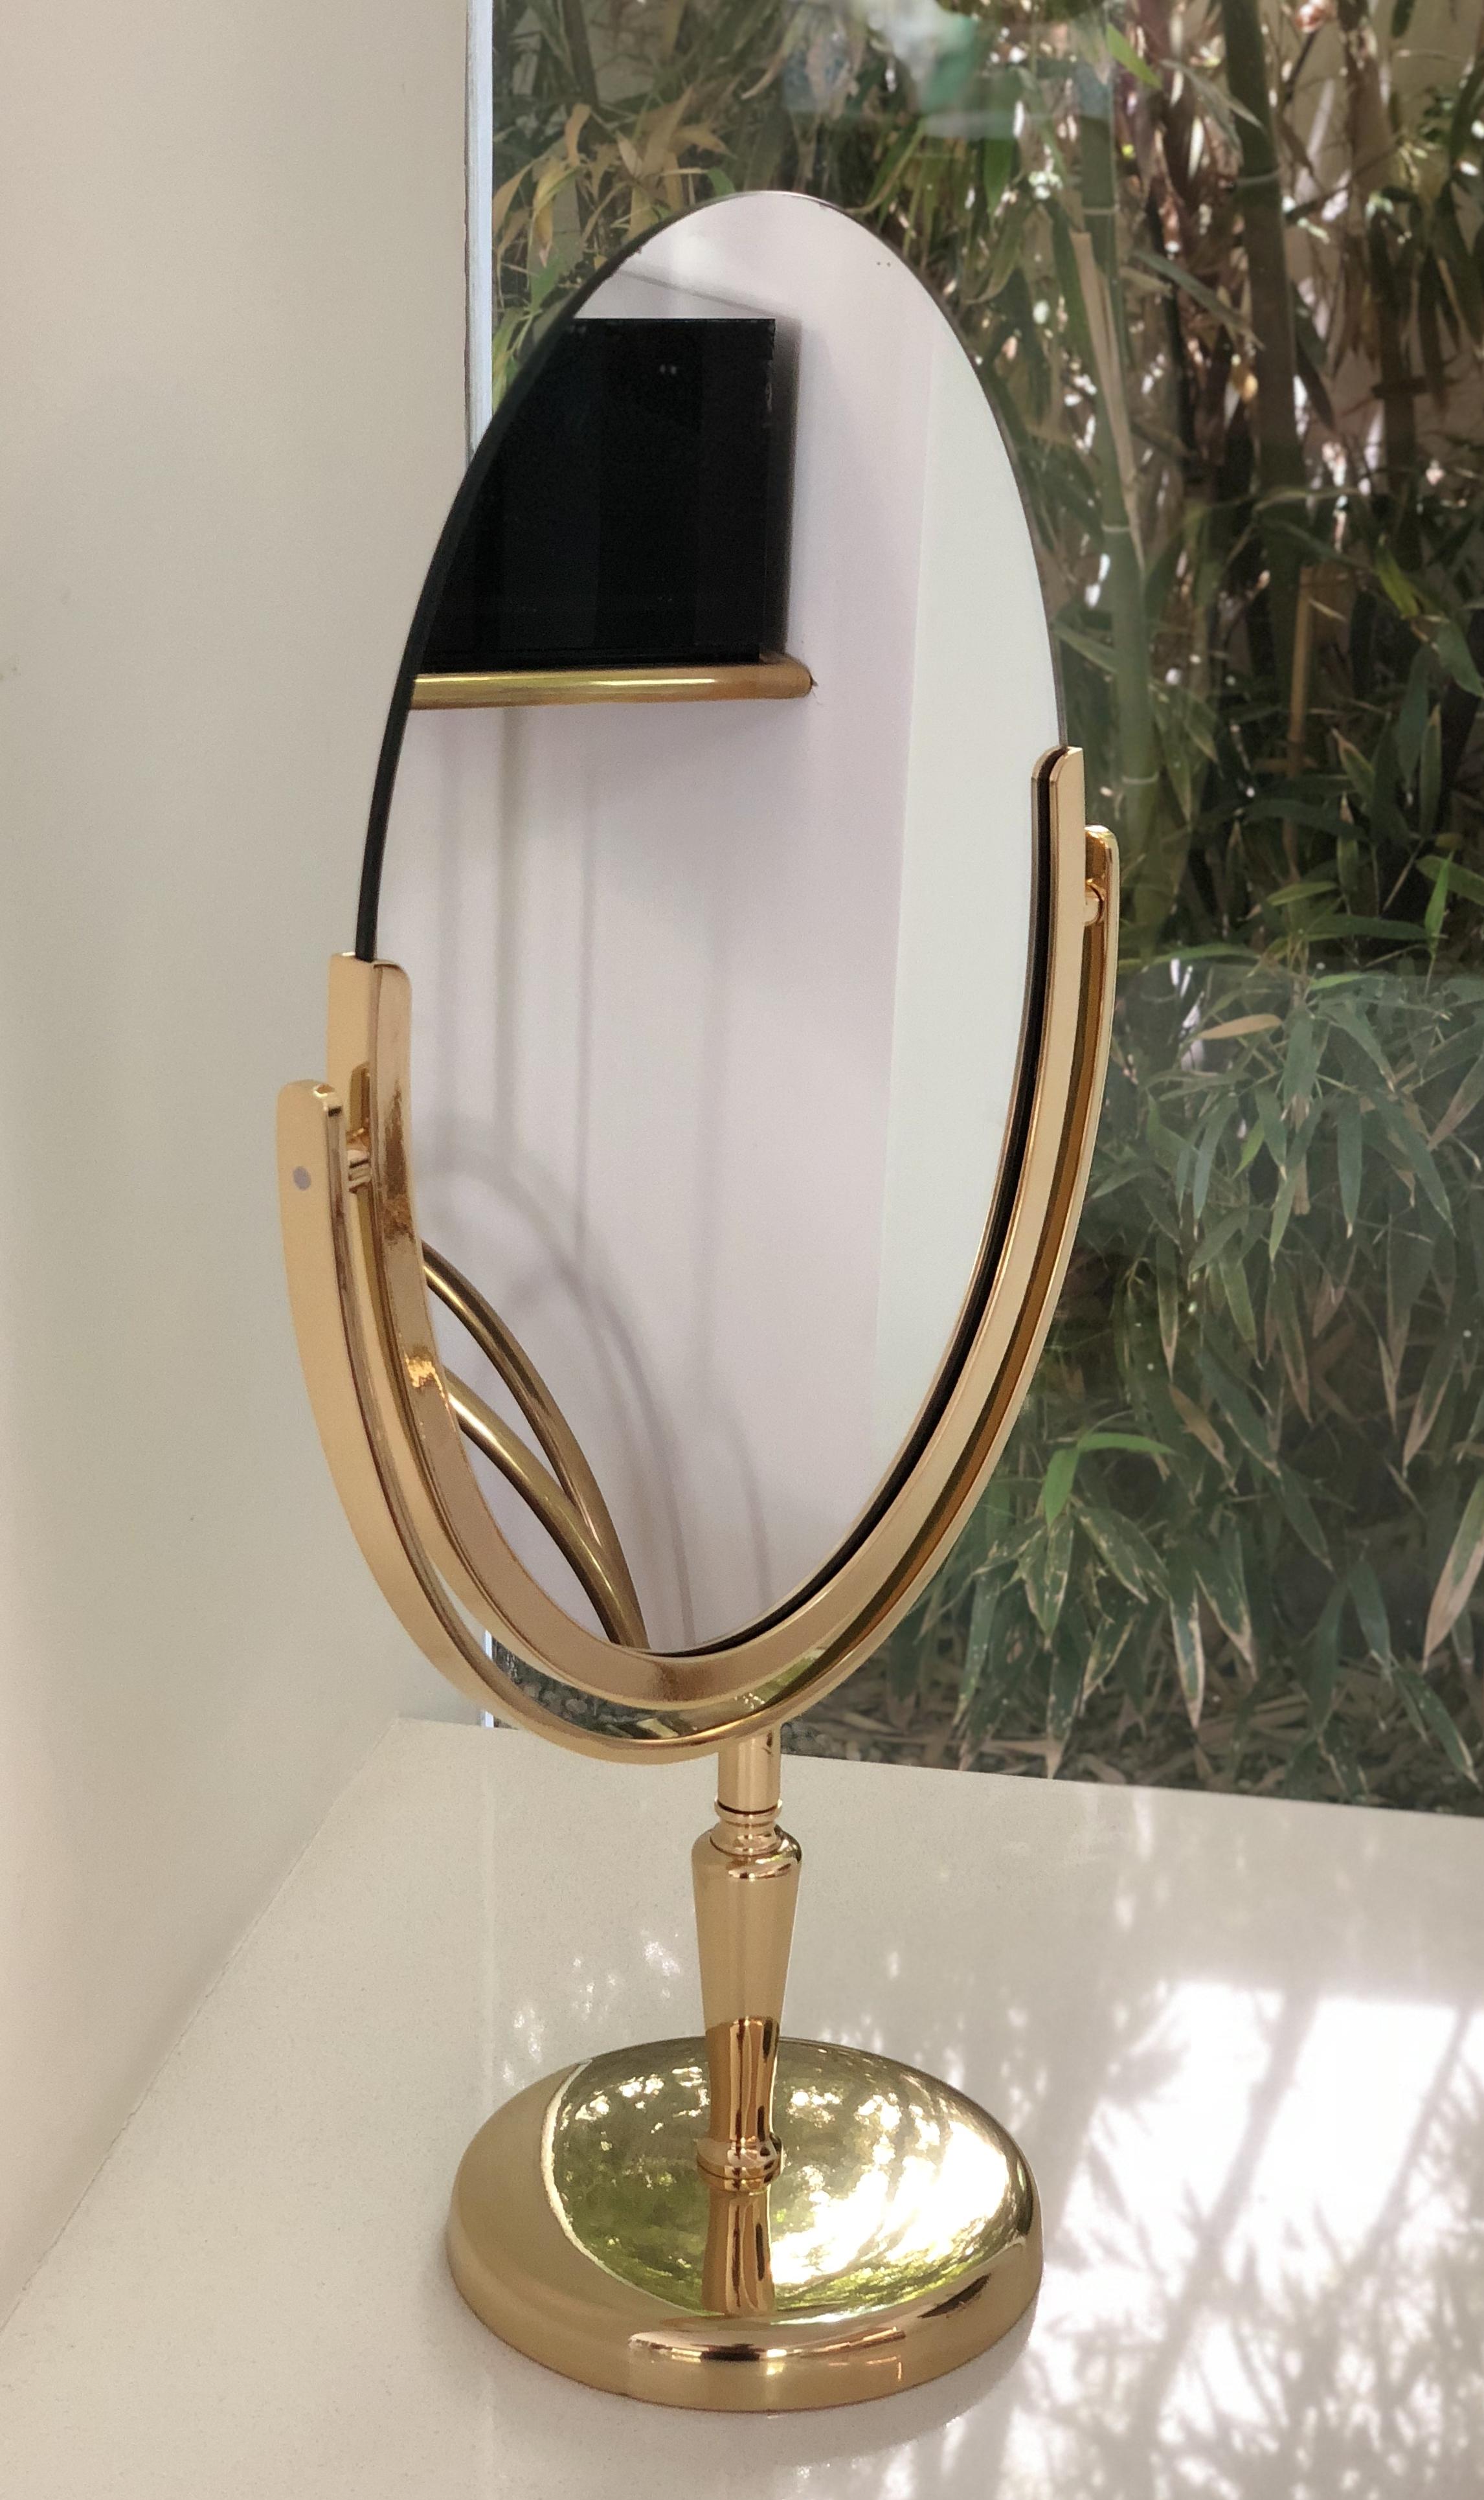 Large and beautiful oval mirror designed and manufactured by Charles Hollis Jones in the 1960s.
The mirror has a beautiful hand polished patina, the mirror is double sided and it can be flipped to be used on either side.

Measurements: 20